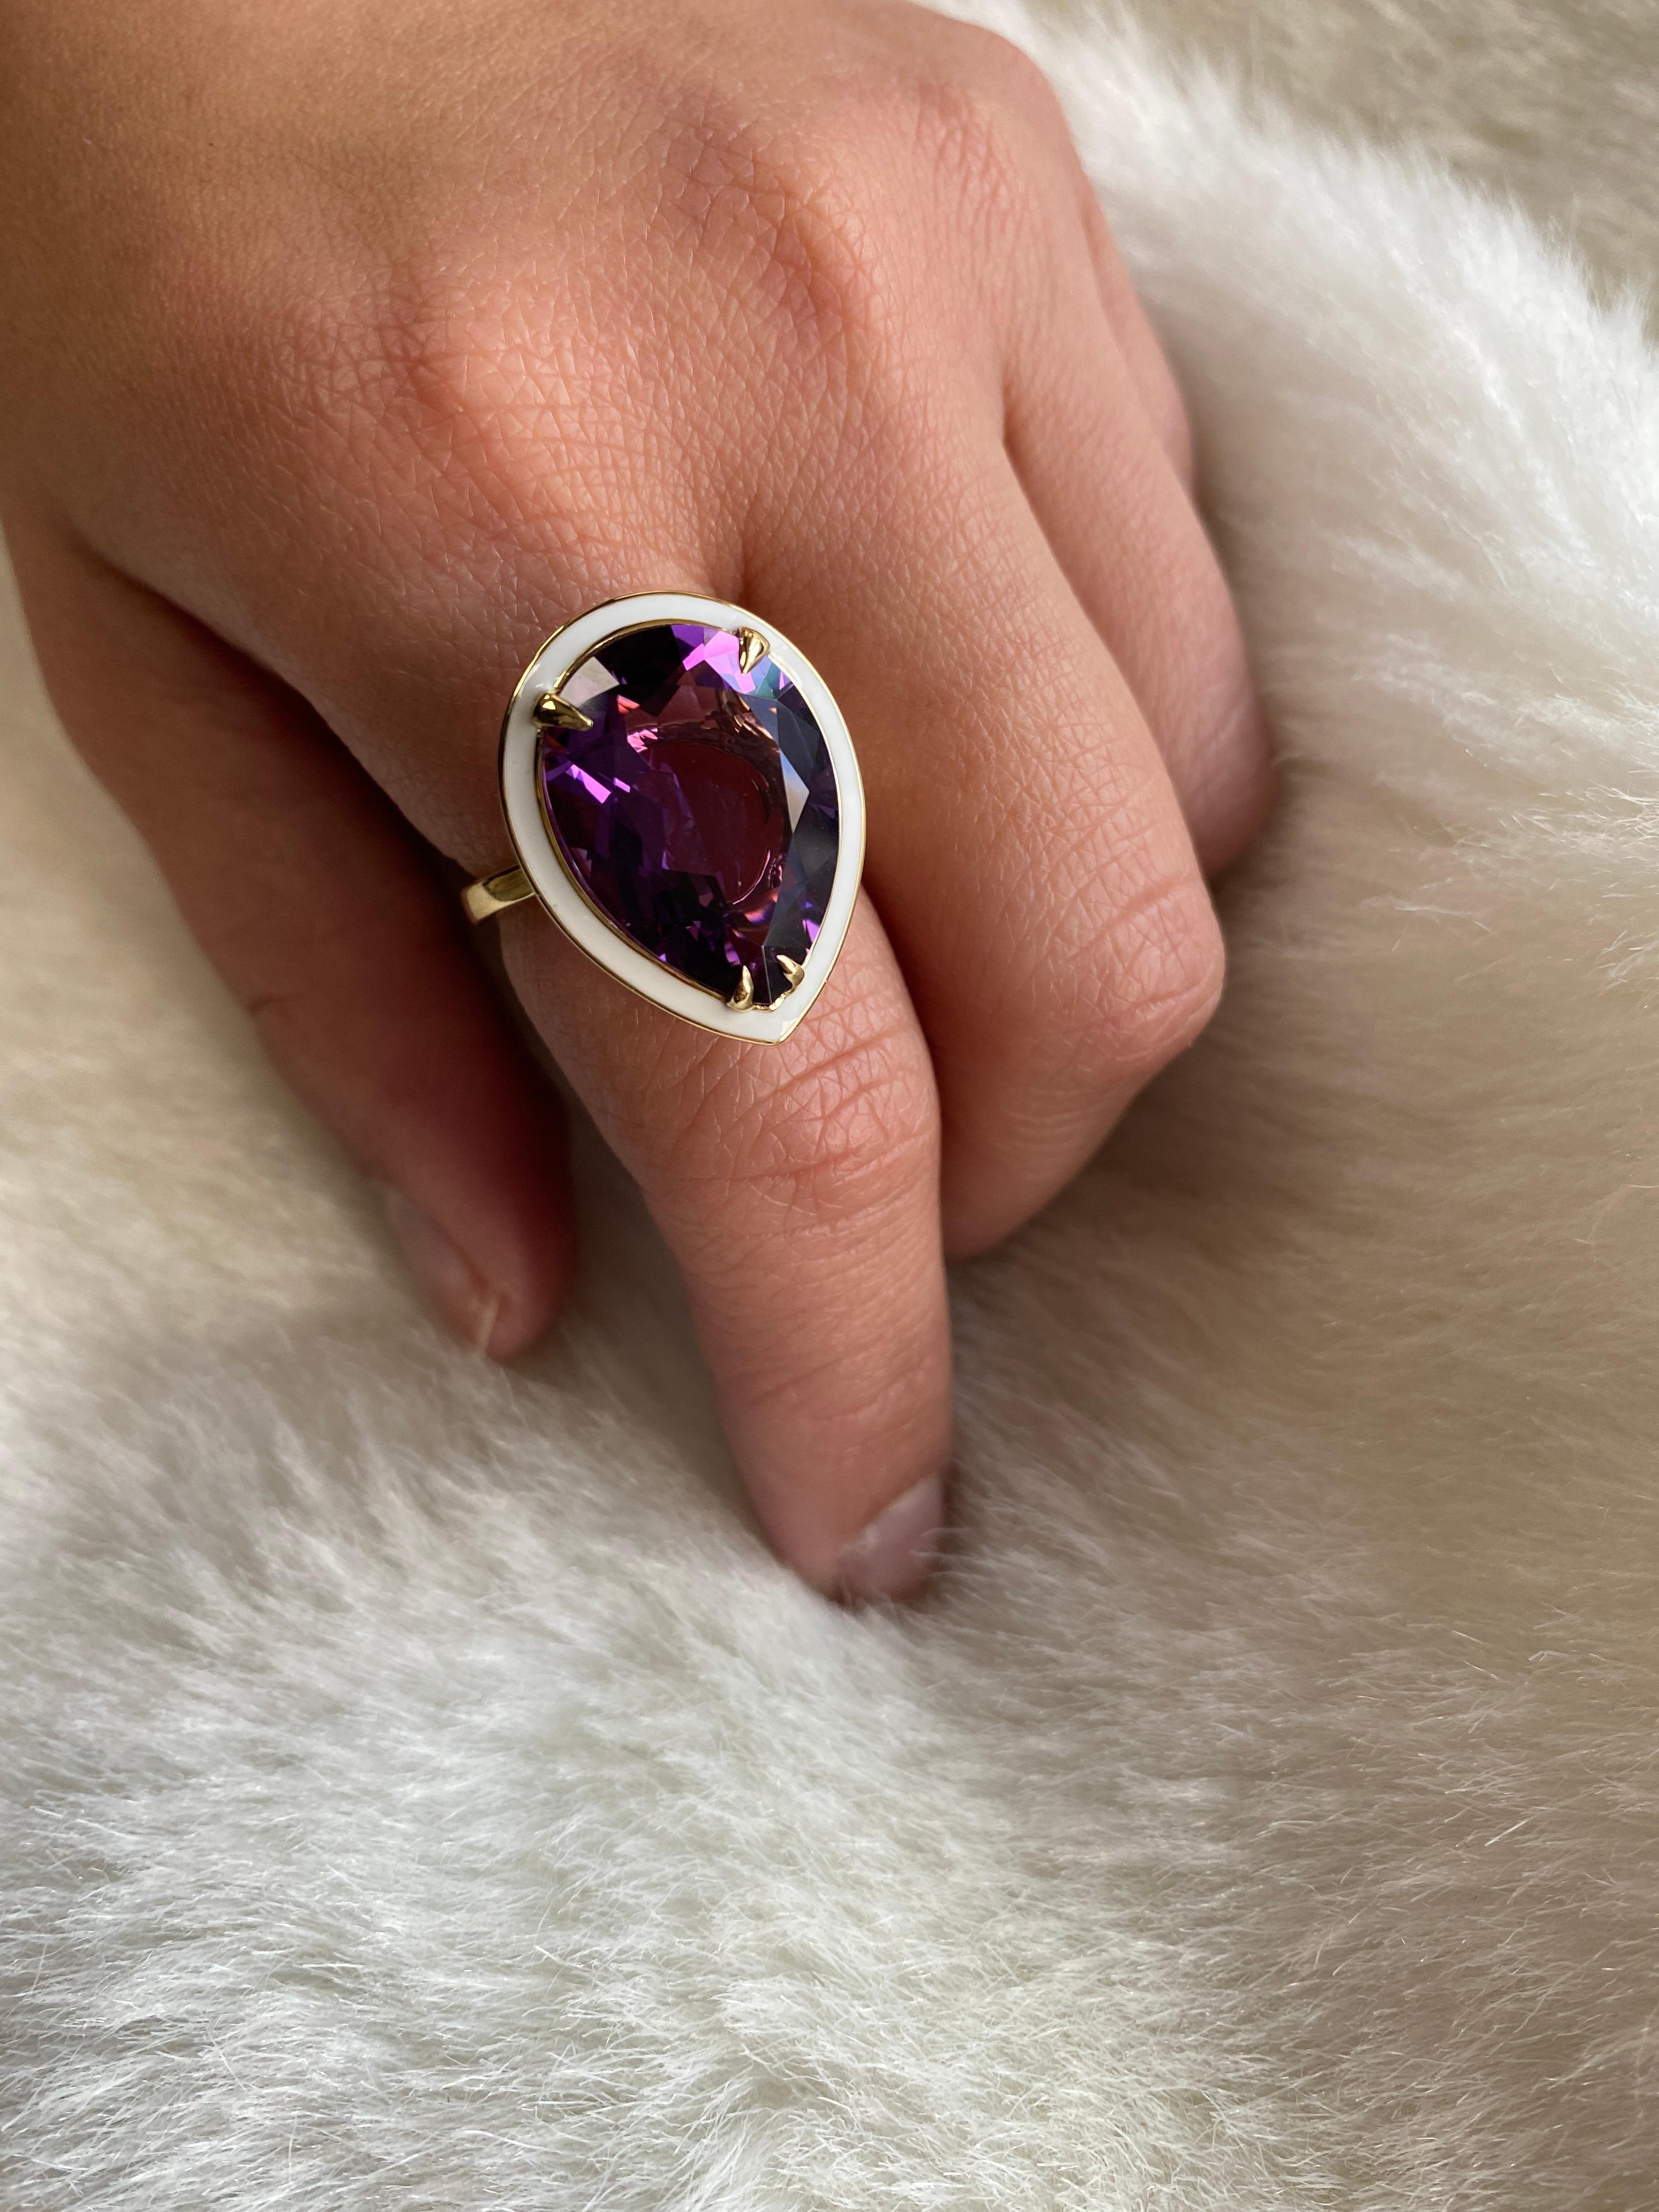 Pear Shape Rubelite Ring With White Enamel in 18K Yellow Gold, from 'G-One' Collection. The combination of enamel and Rubelite makes this ring very unique and a wonderful piece to add to your personal collection.

* Gemstone size: 18 x 13 mm
*